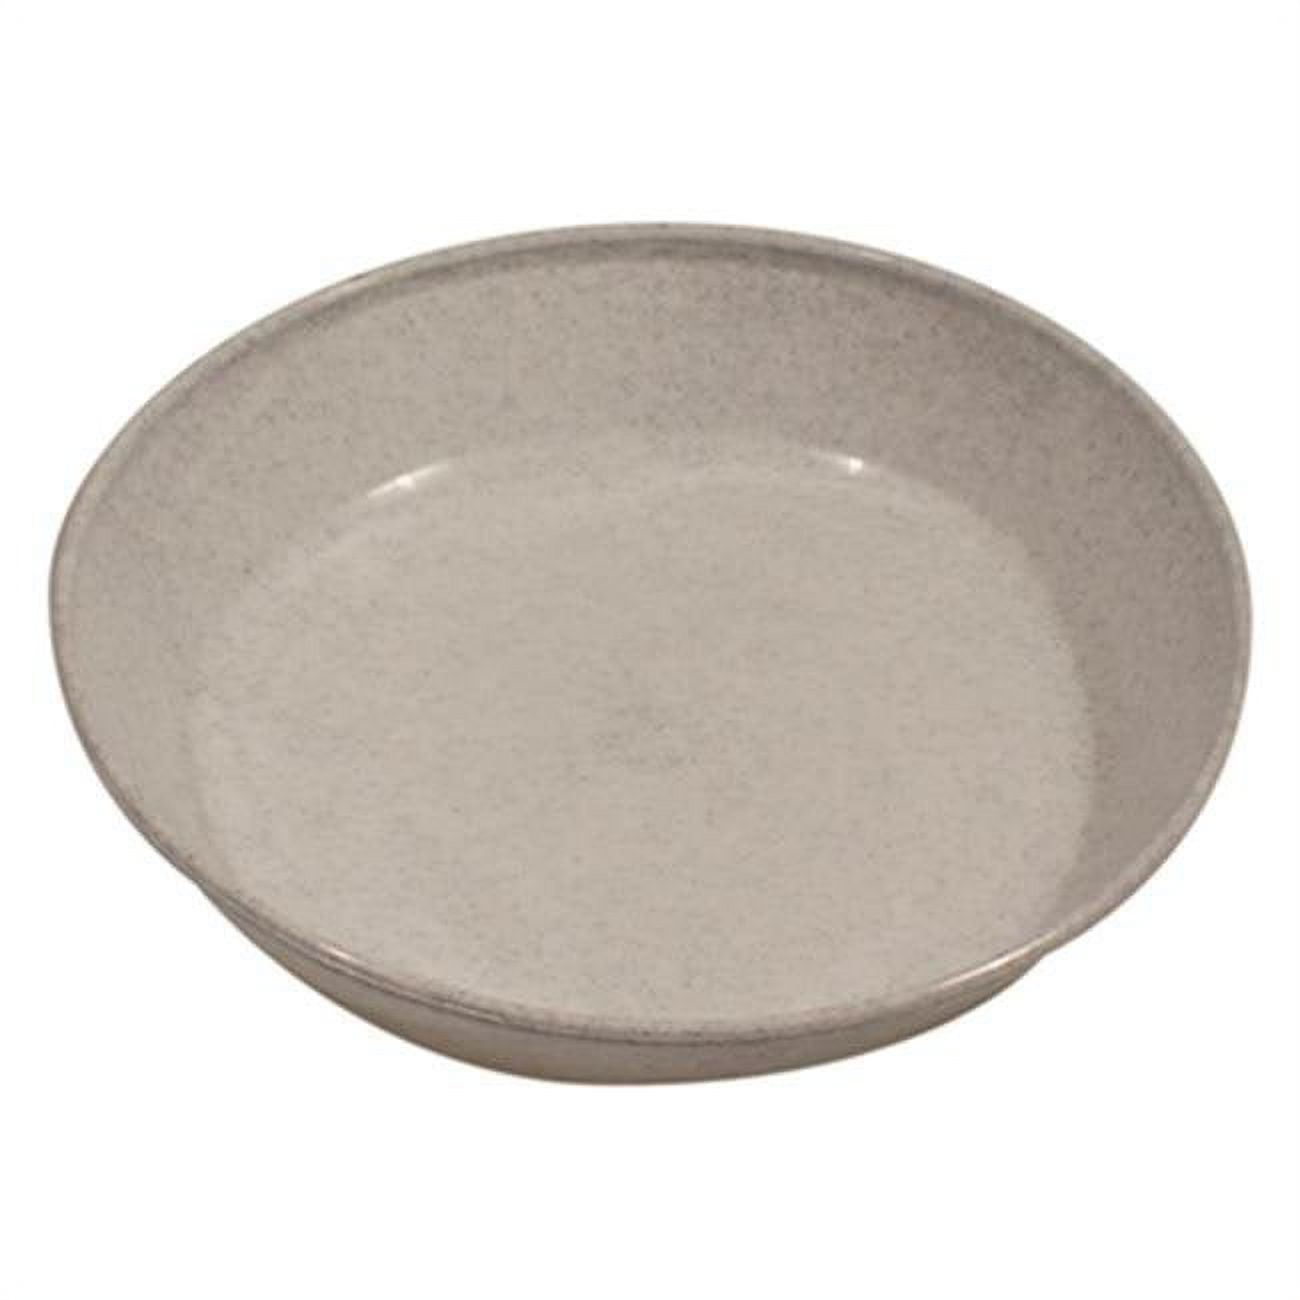 Picture of Austin Planter 5AS-G5pack 5 in. Granite Saucer - Pack of 5